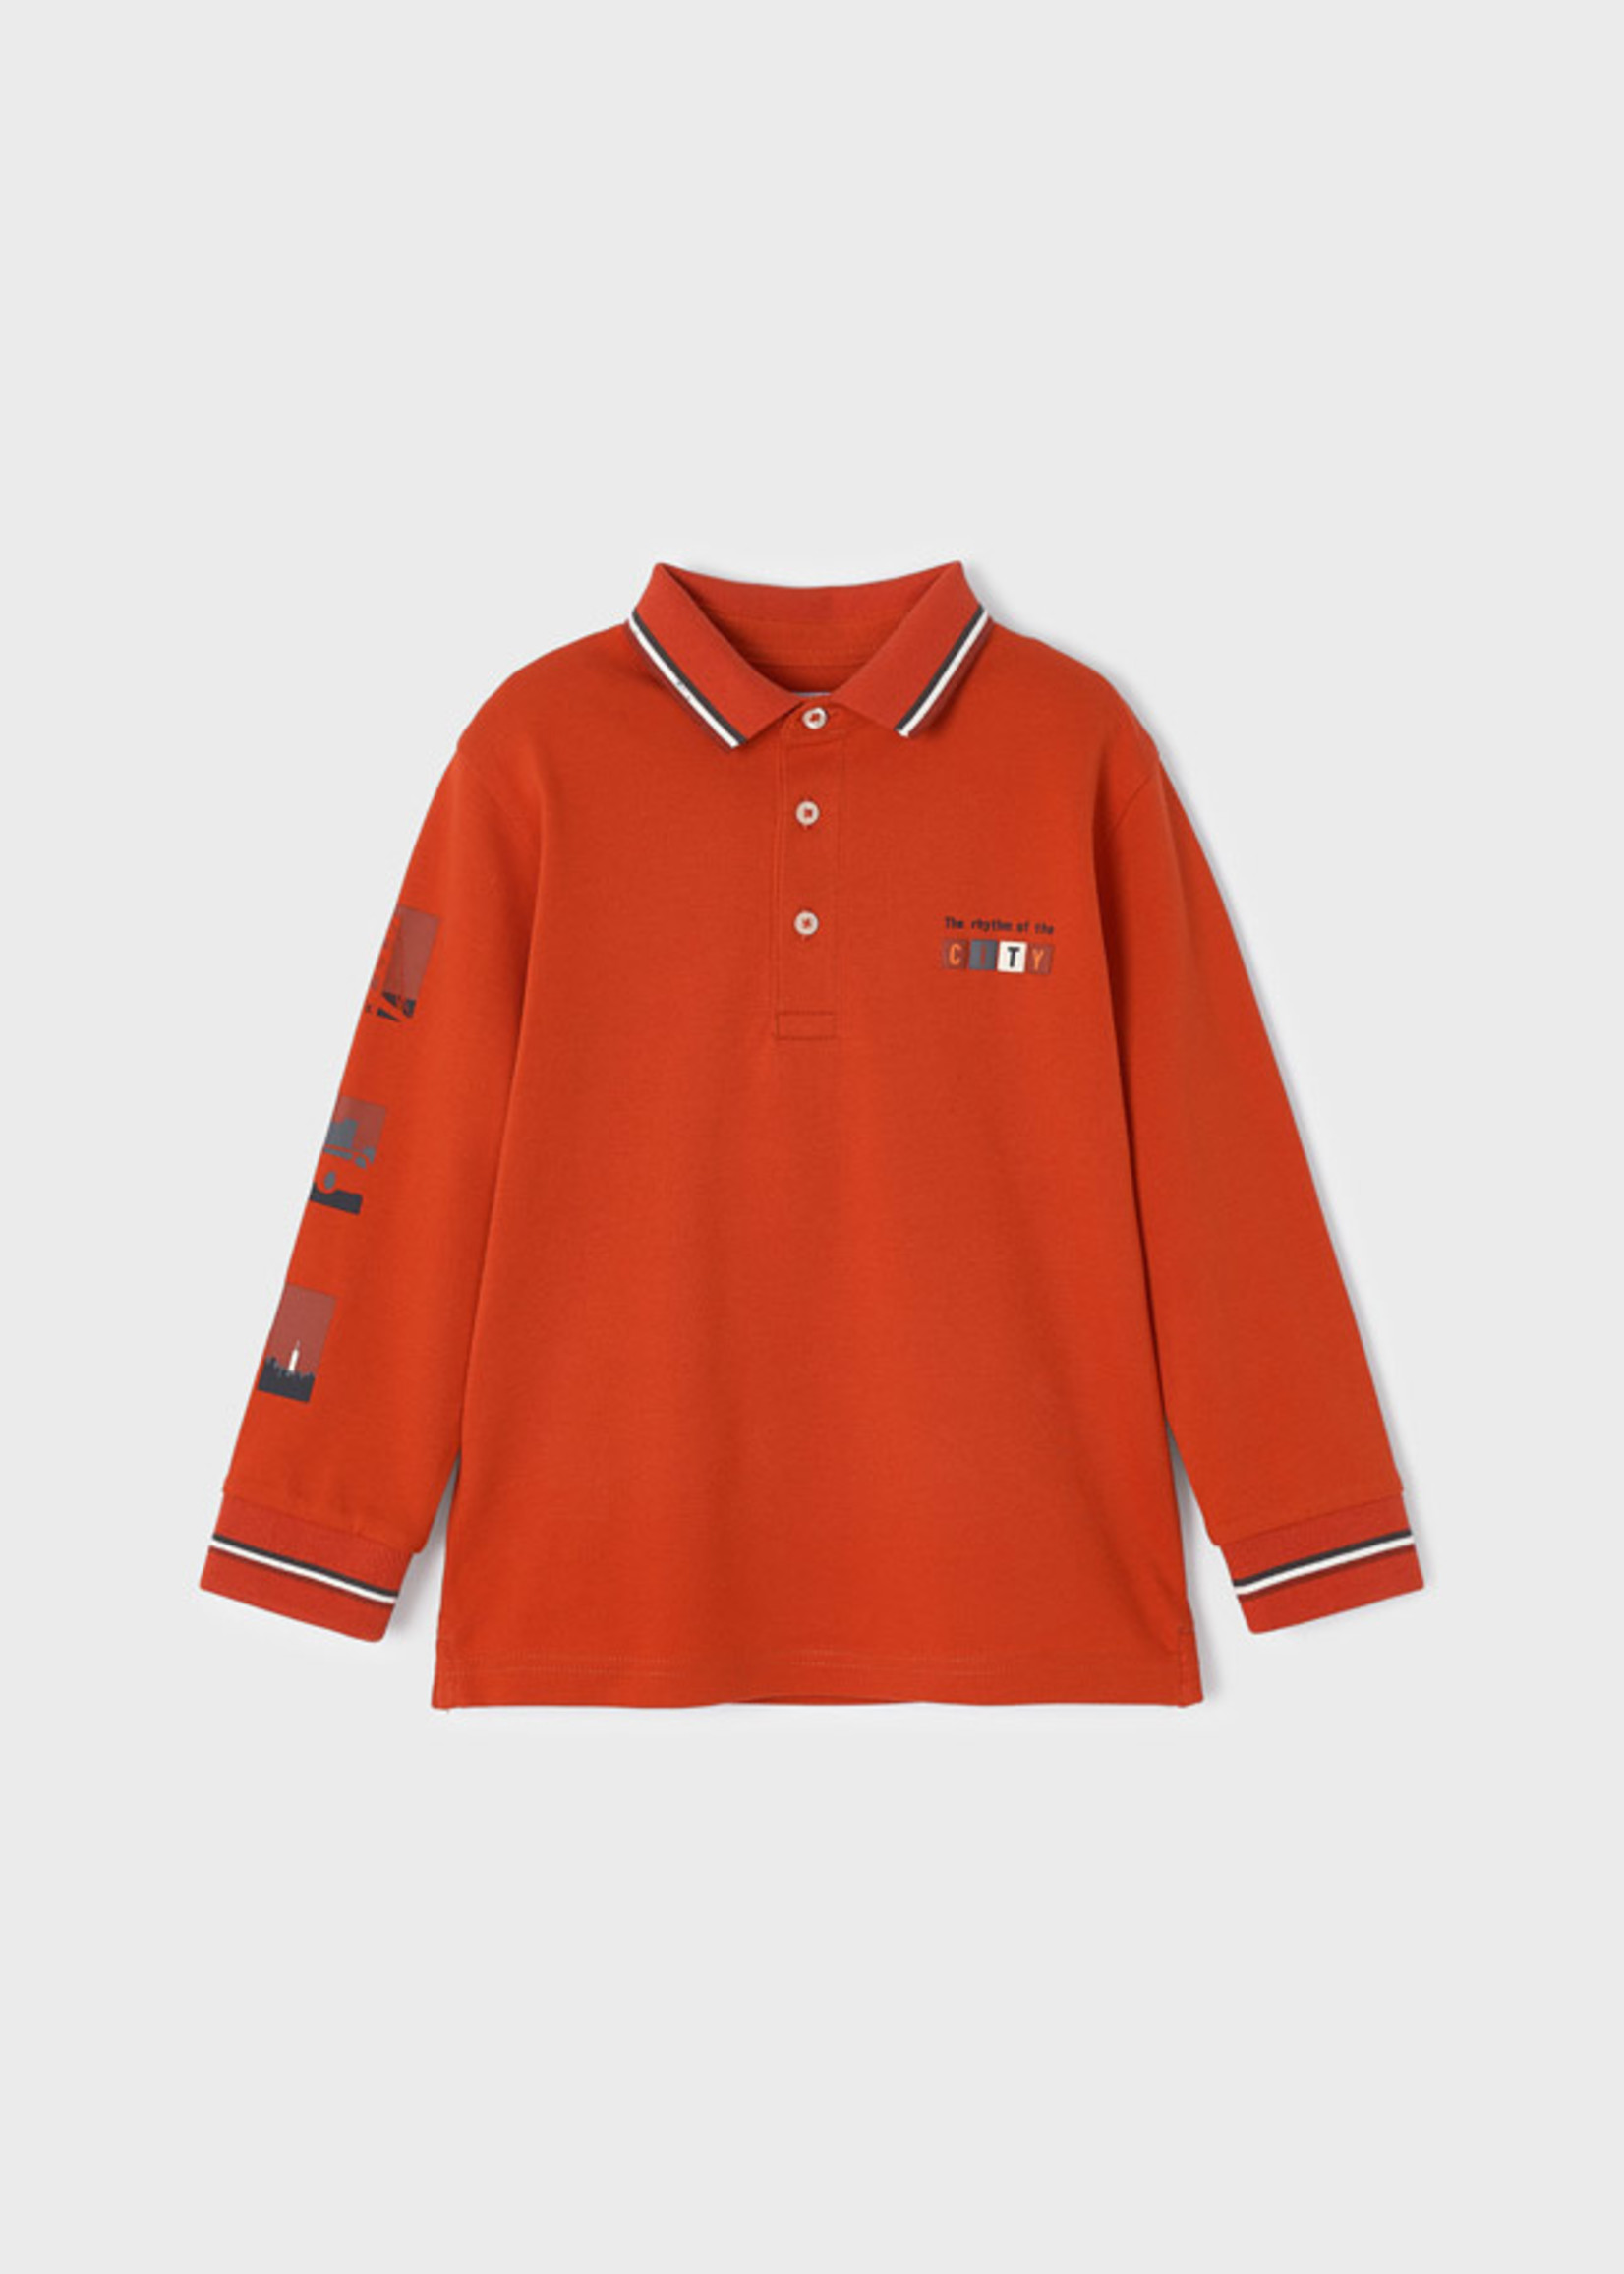 Mayoral L/s Polo                      Rust